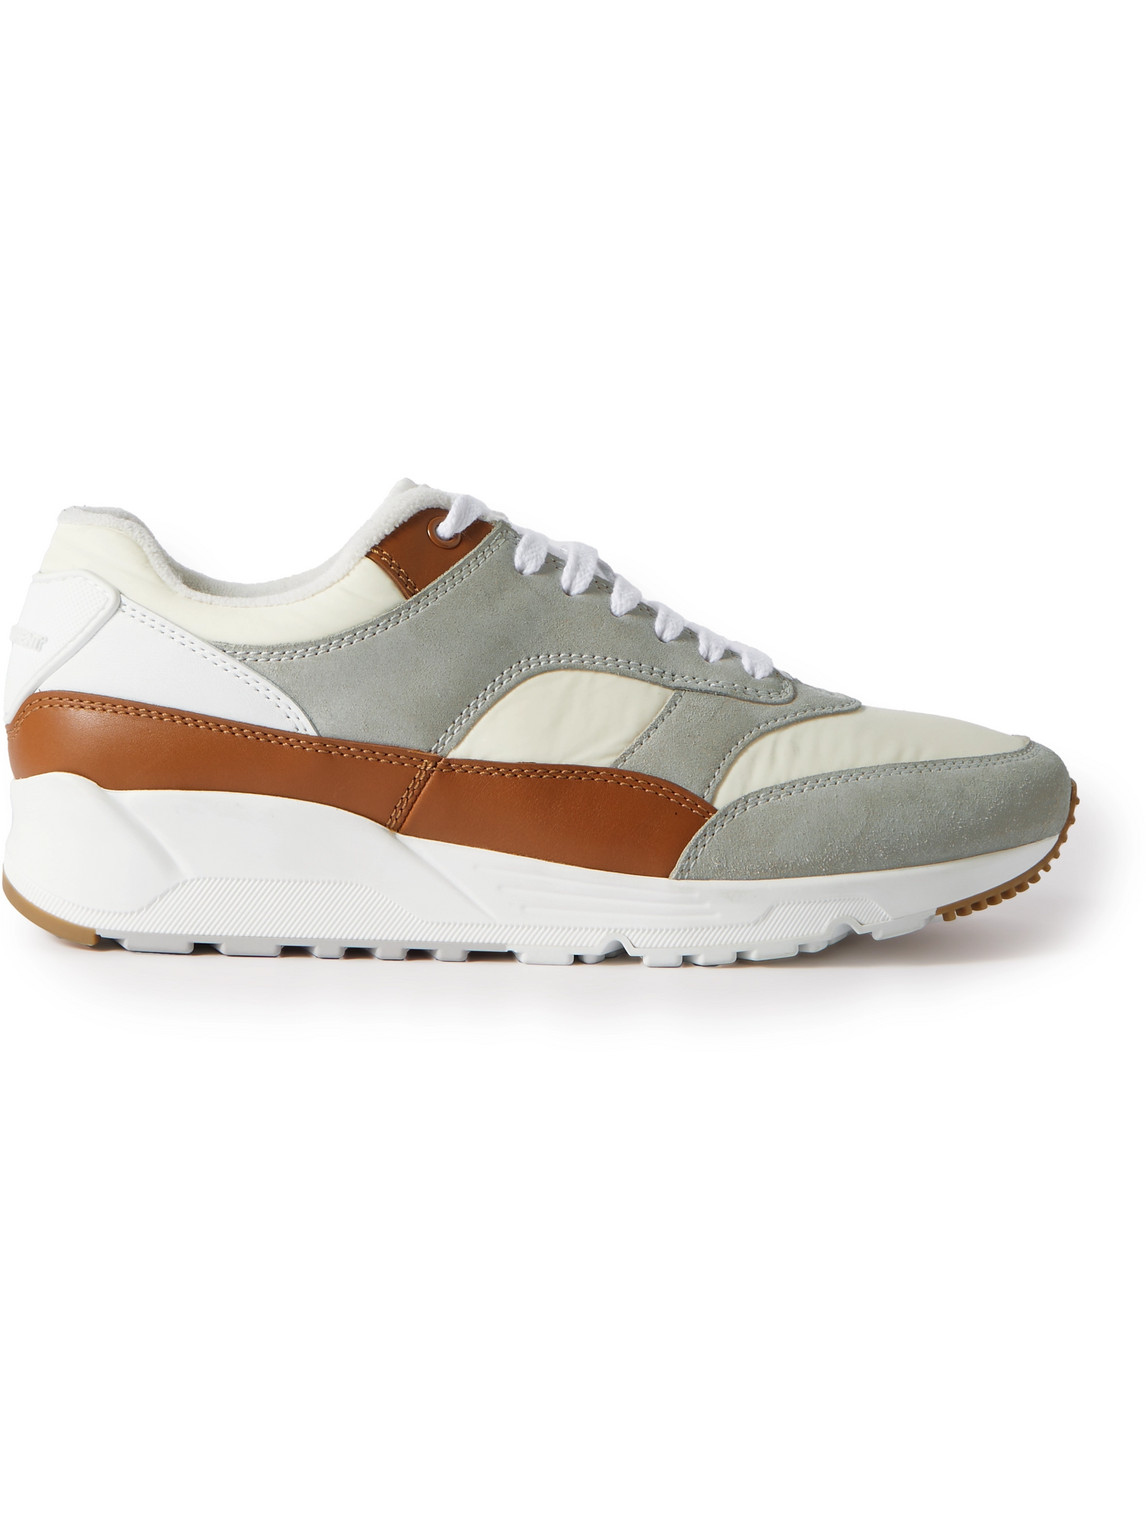 Saint Laurent Bump Colour-block Suede, Shell And Leather Low-top Sneakers In Grey/white